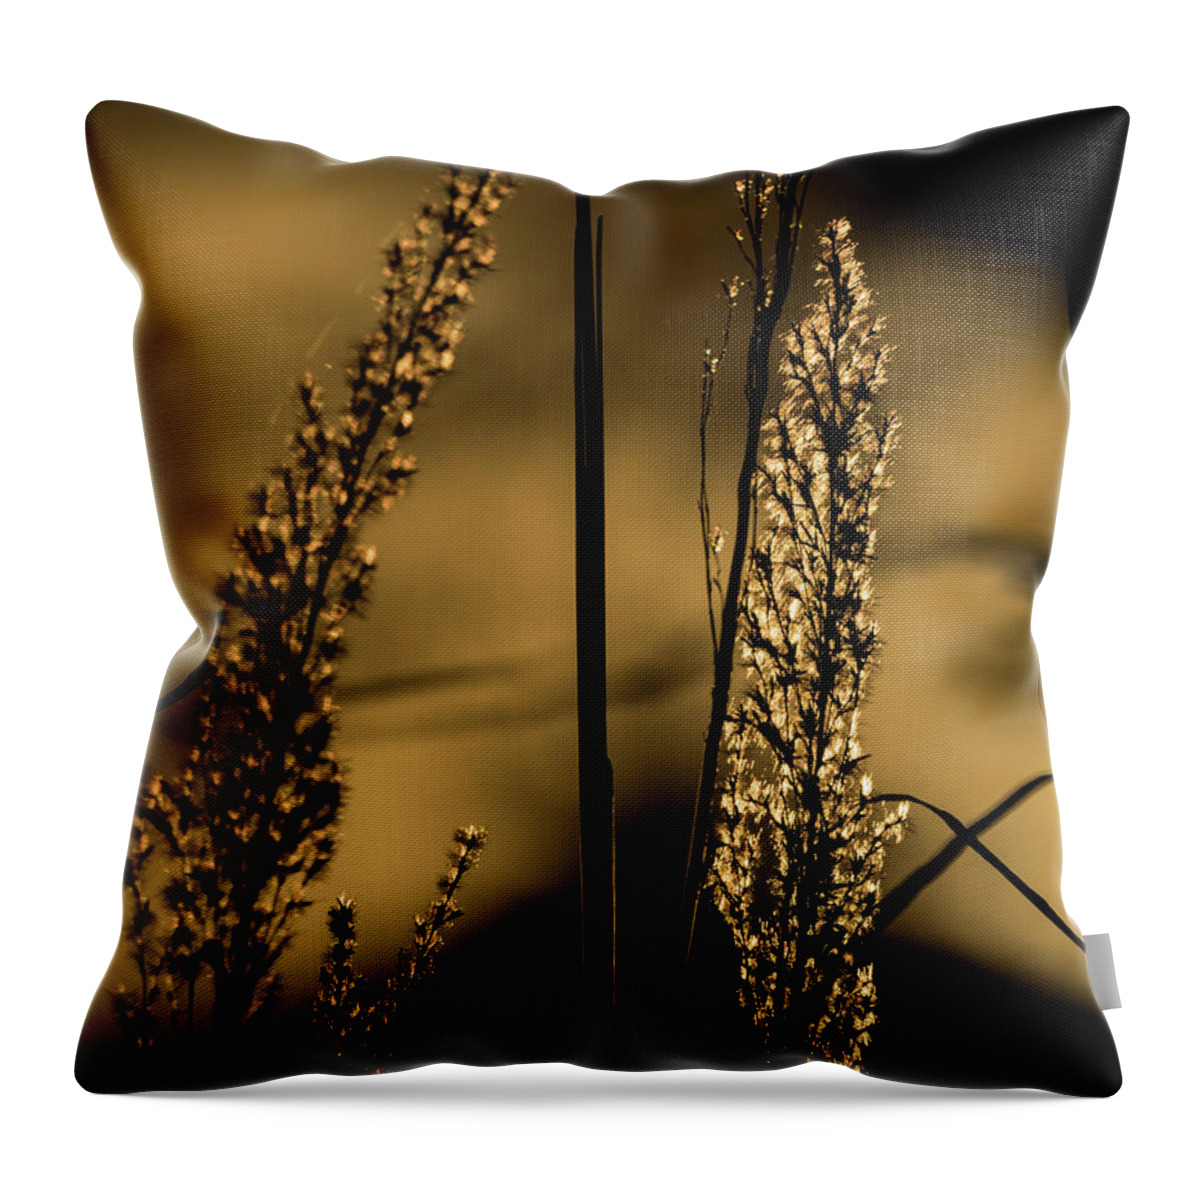 Jay Stockhaus Throw Pillow featuring the photograph Winter Grass by Jay Stockhaus